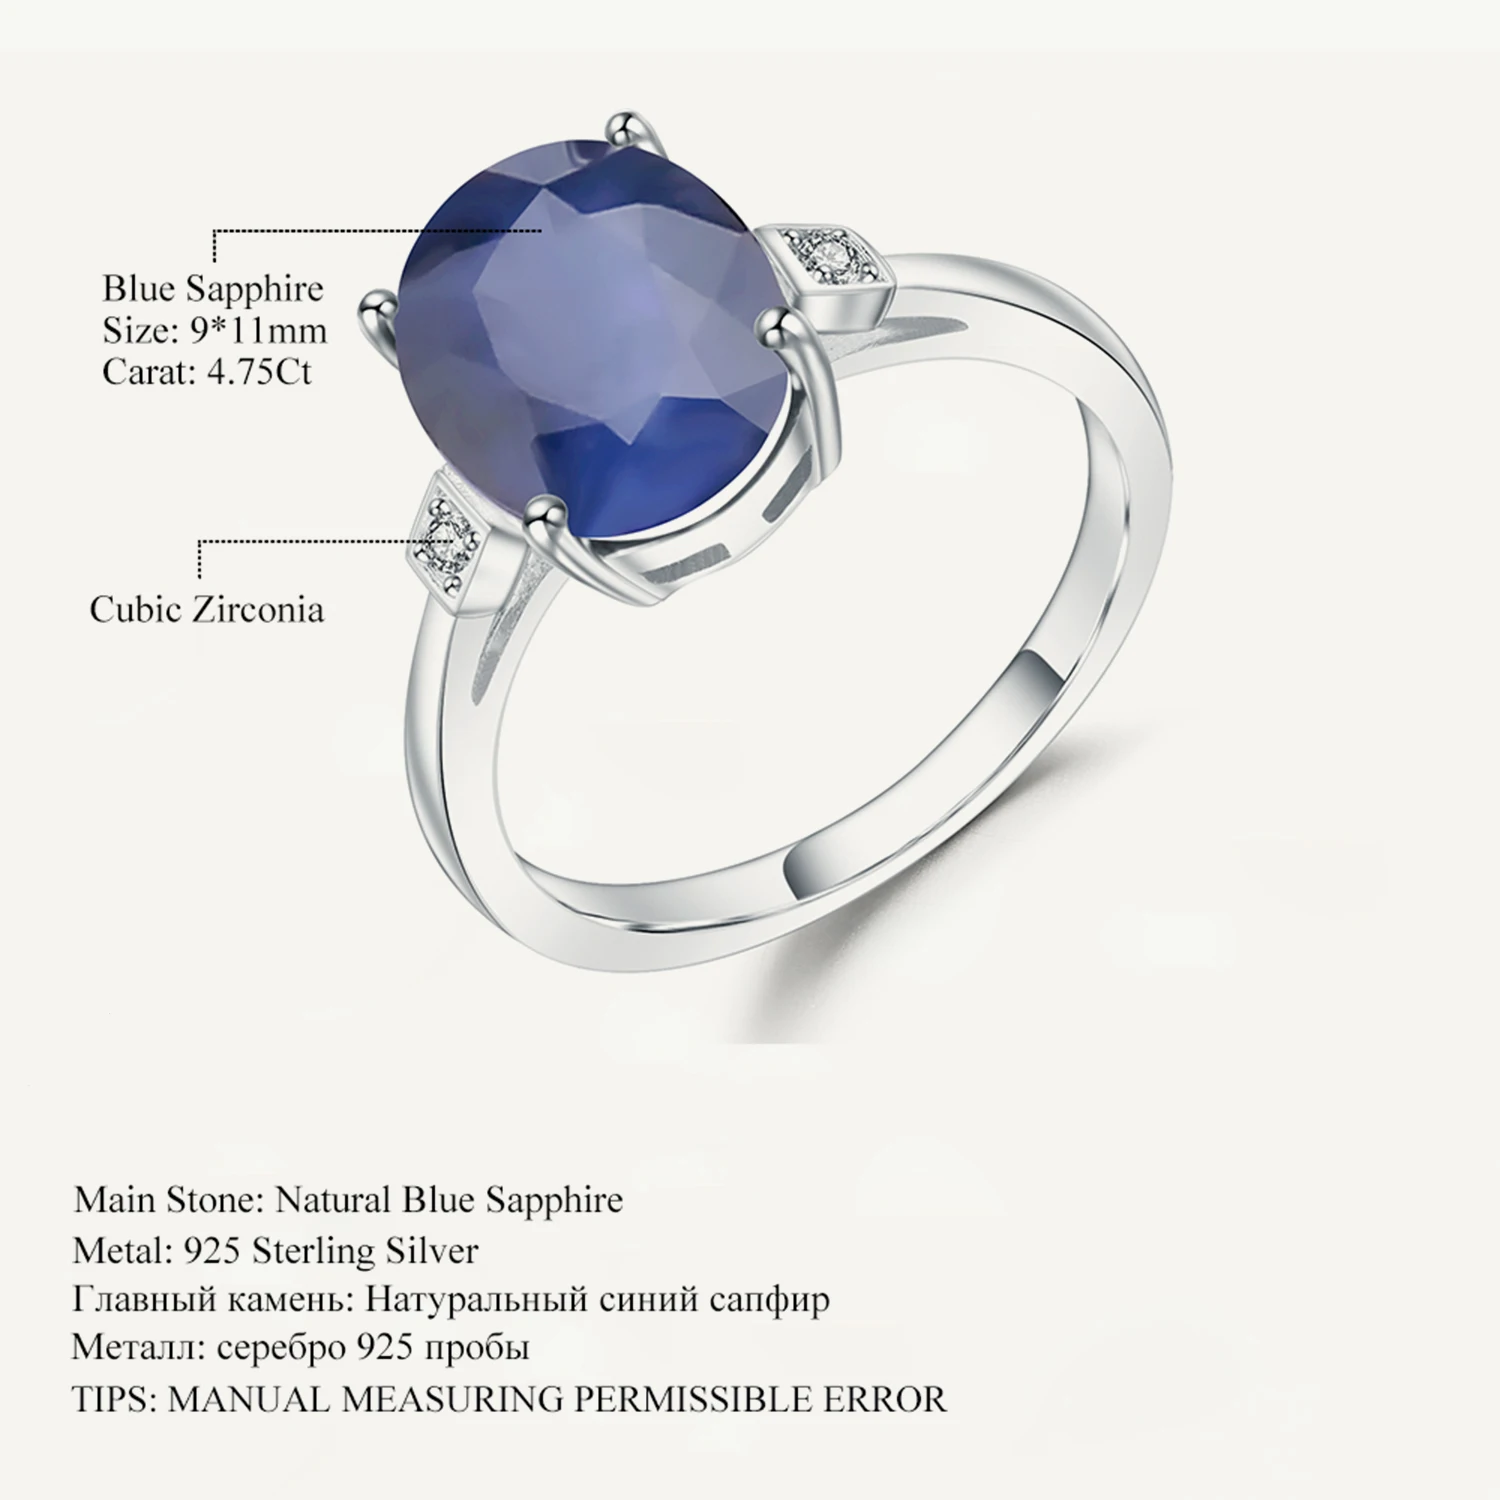 4.78Ct Oval Natural Blue Sapphire Gemstone Ring 925 Sterling Silver Simple Weddi - £57.30 GBP